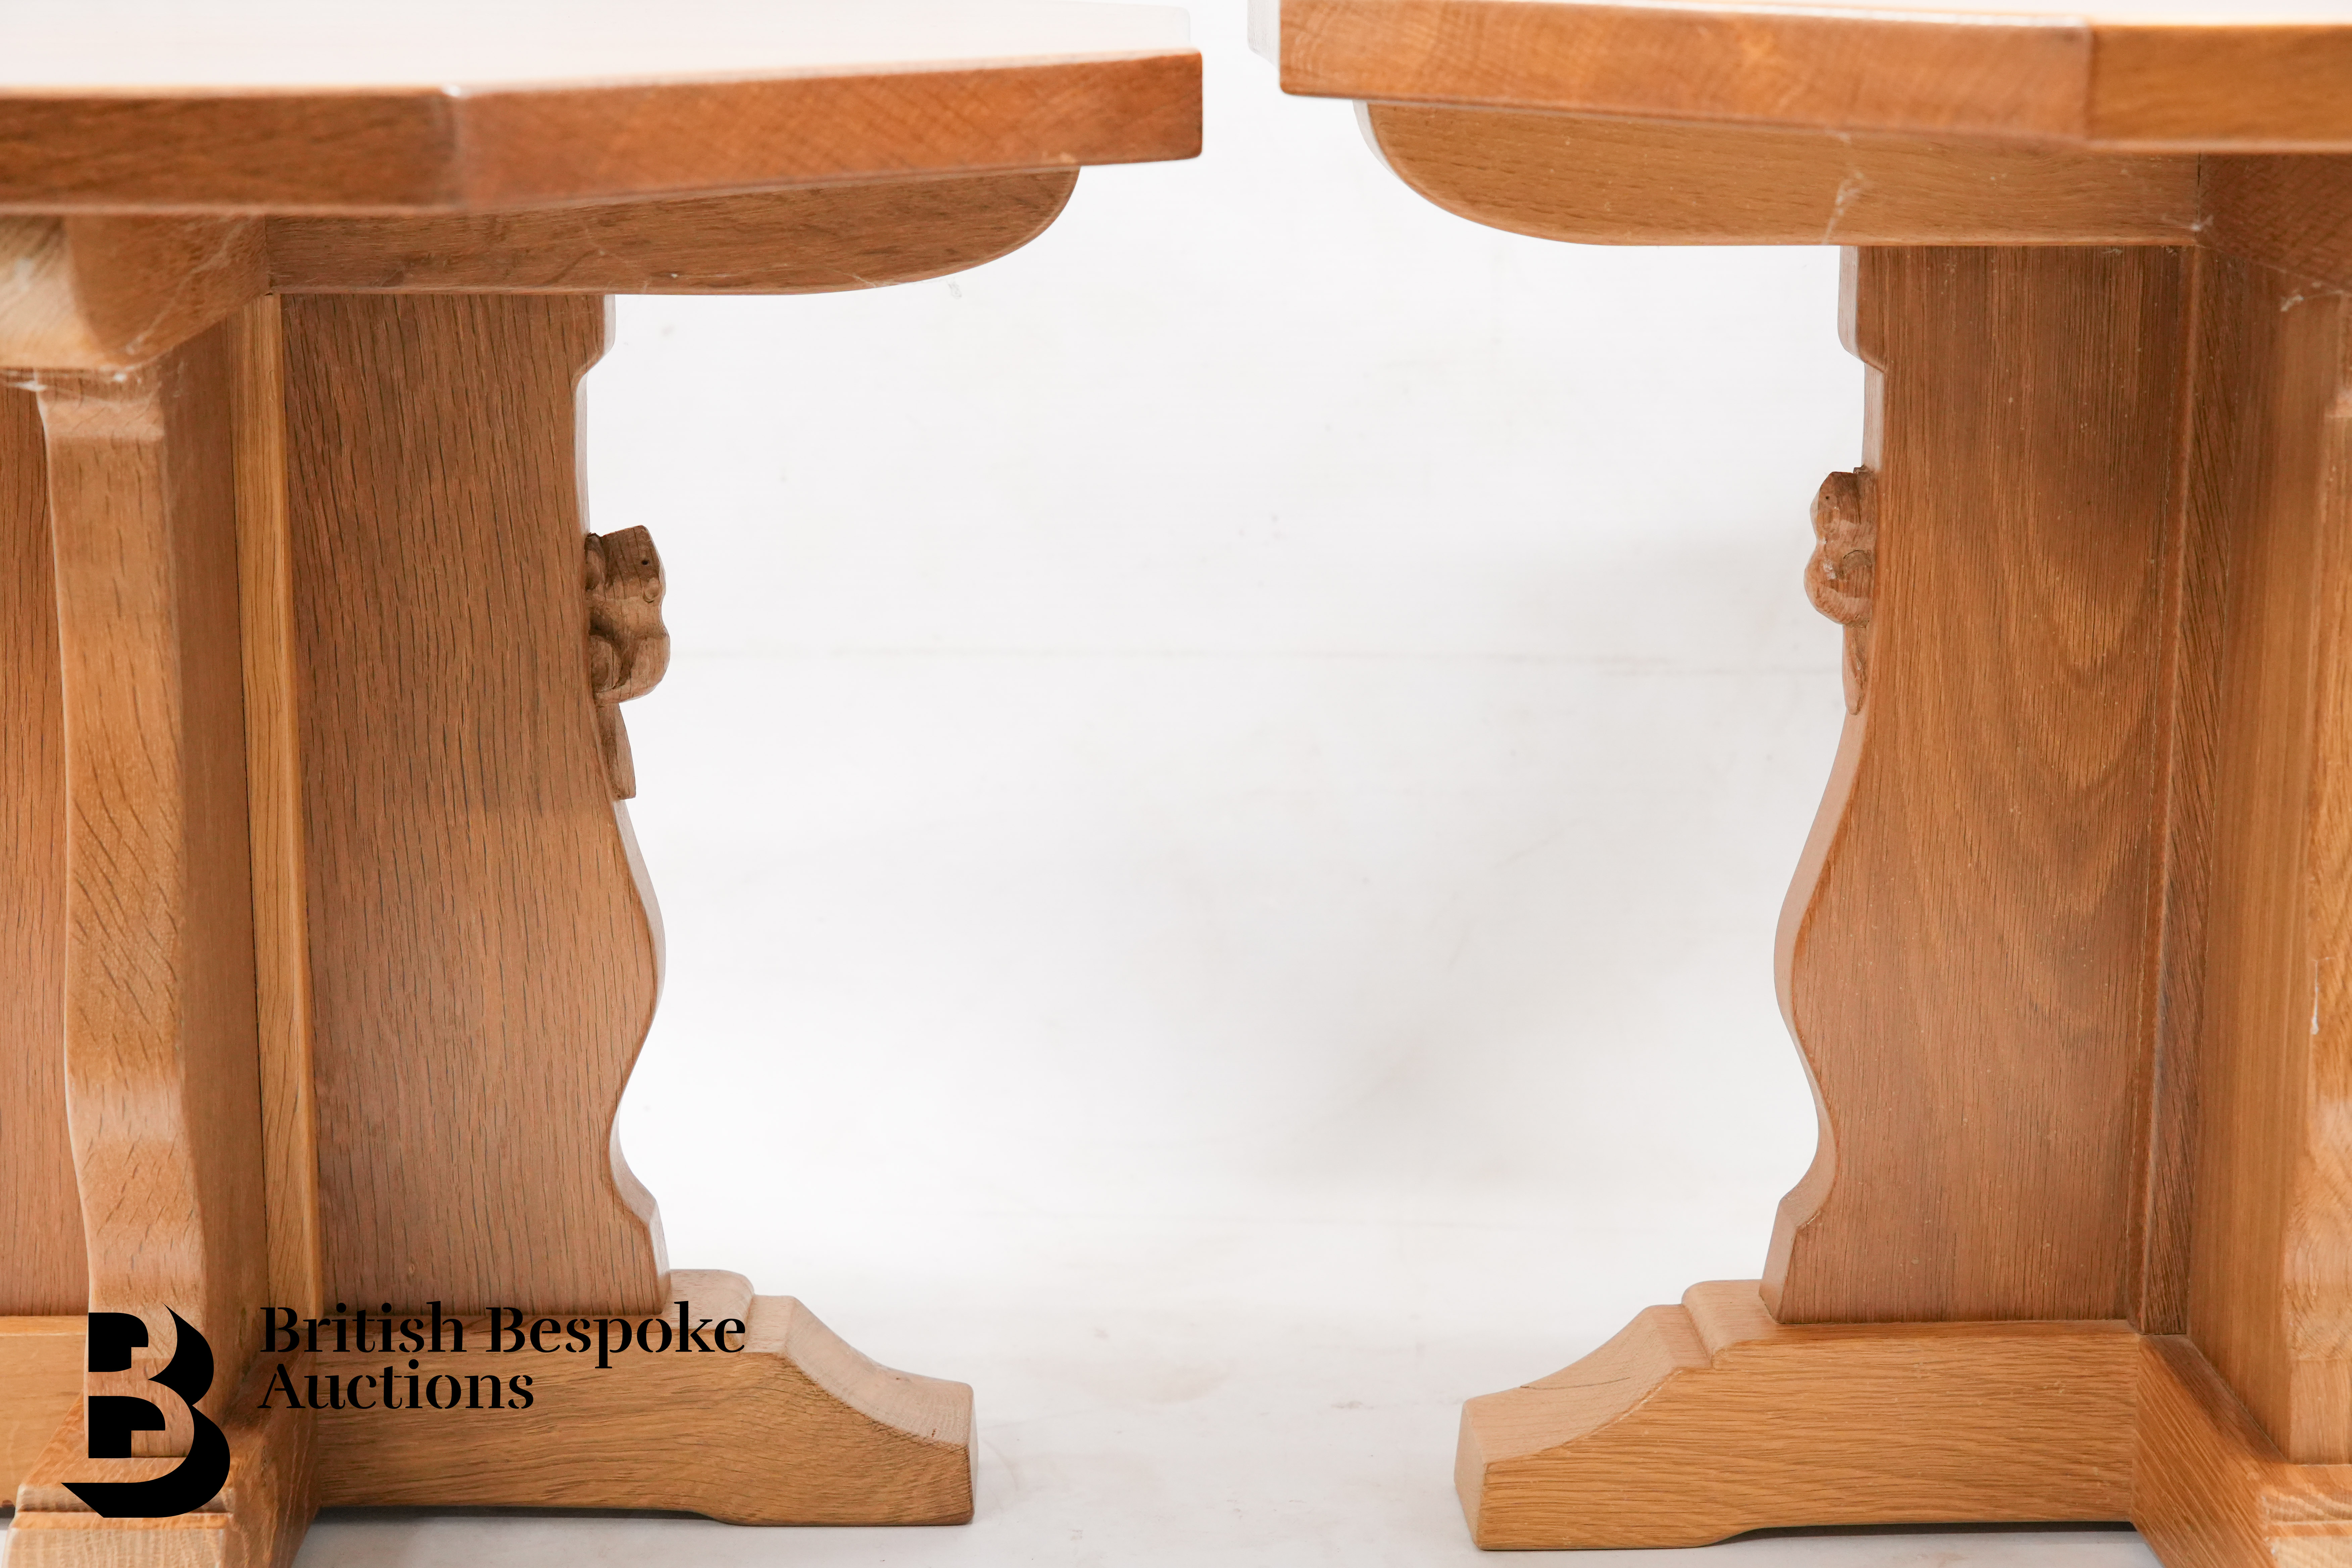 Colin 'Beaverman' Almack Occasional Tables - Image 5 of 8